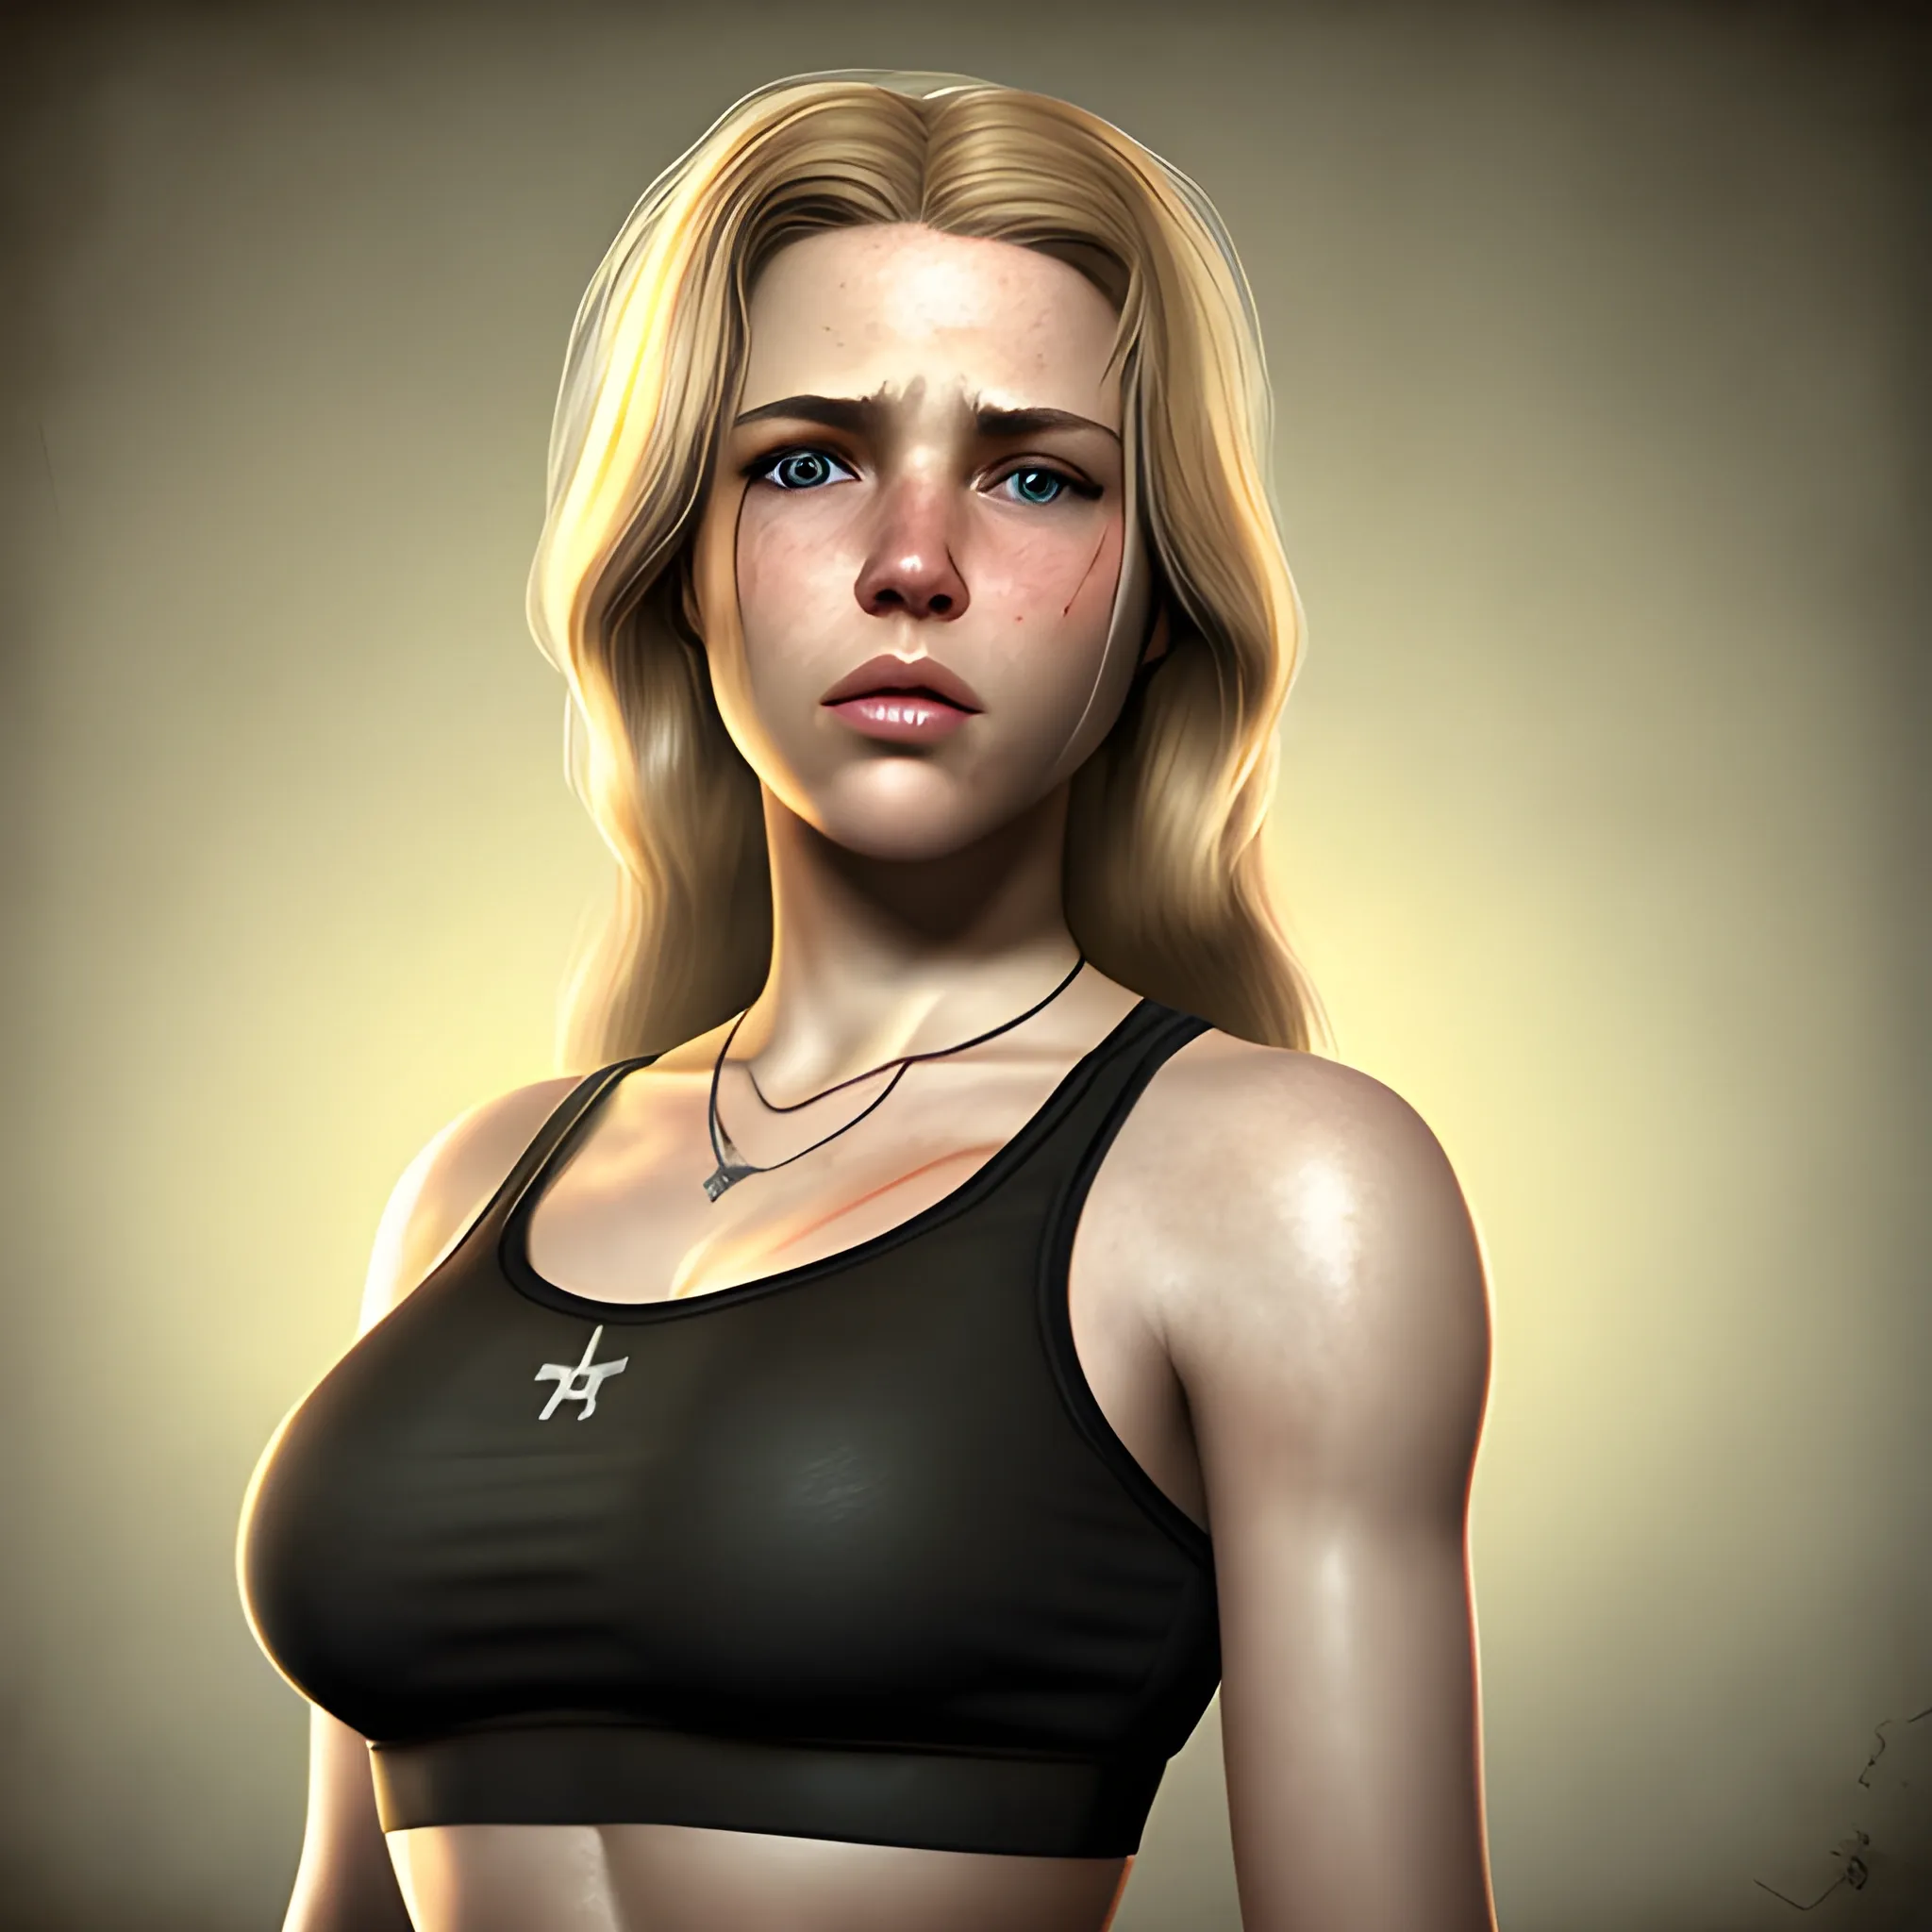 In the style of fallout 1, (masterpiece), (portrait photography), (portrait of a Caucasian female), no makeup, flat chested, white sports bra, dogtags, long hair, blond hair, brown eyes, full lips, round face, round nose, plump cheeks